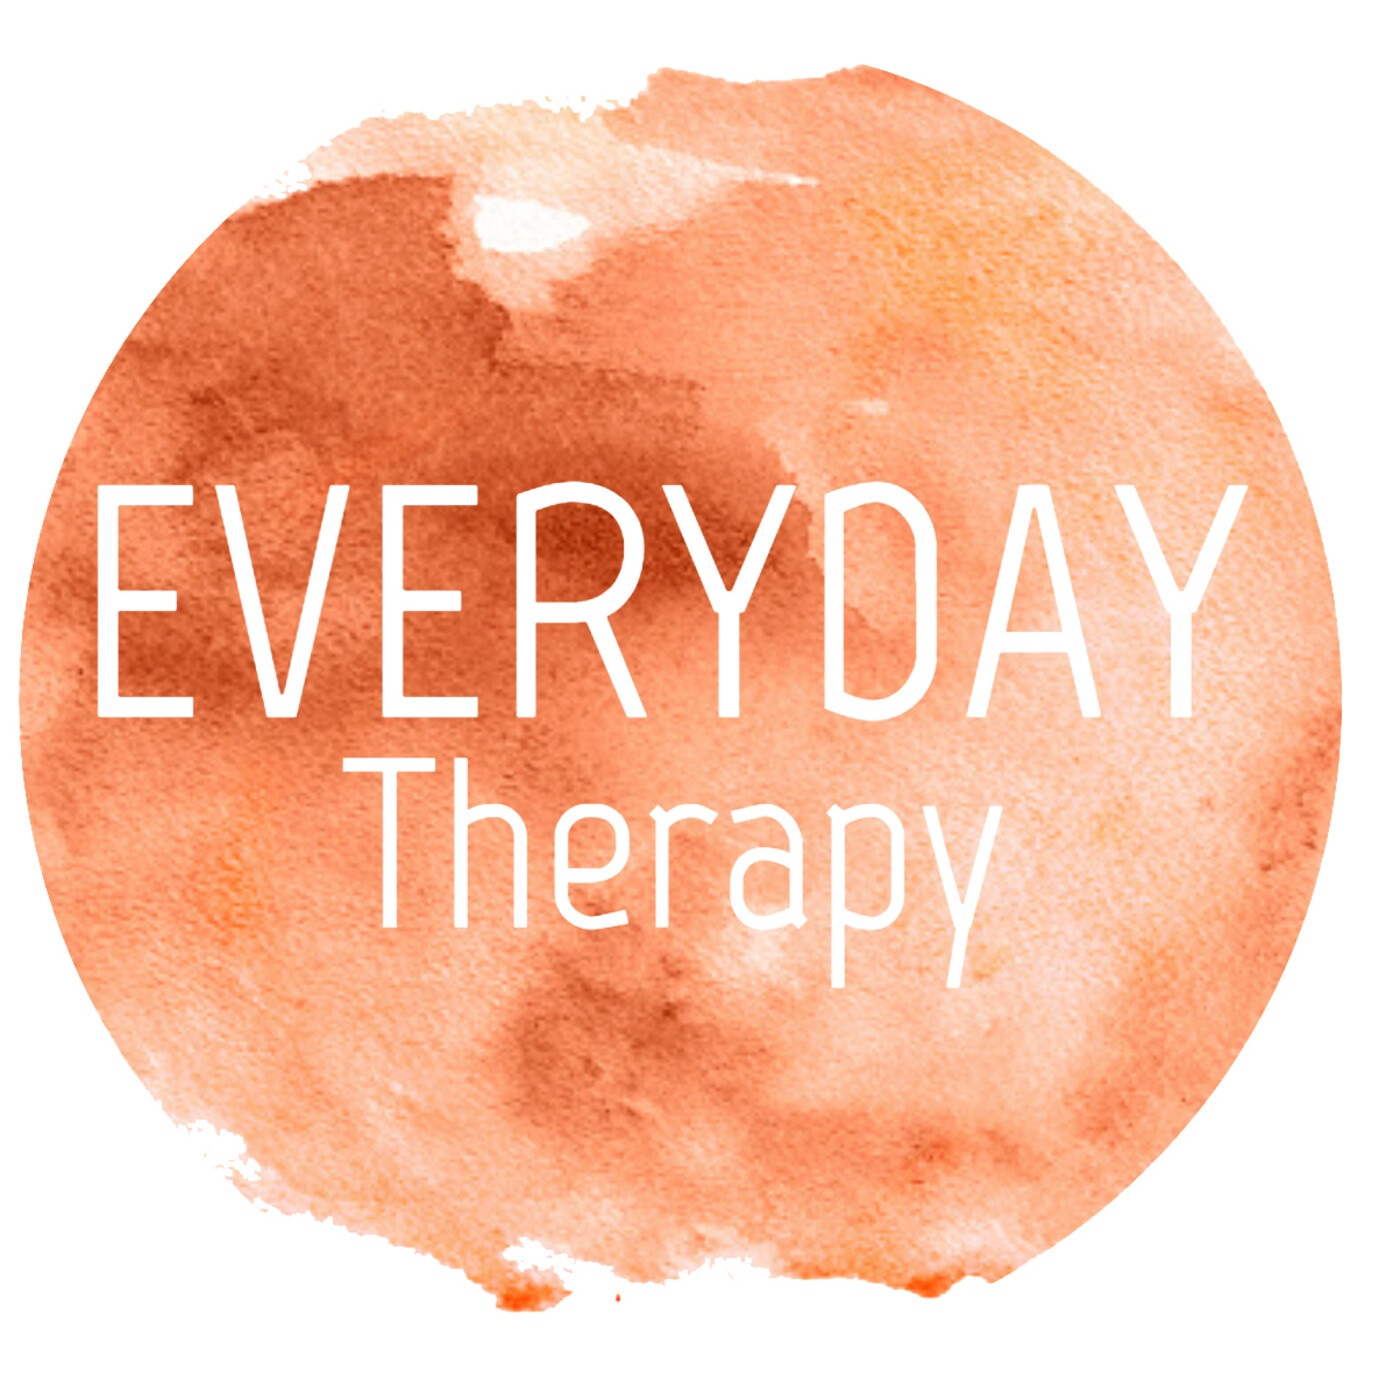 Channel: Everyday Therapy Podcast. 